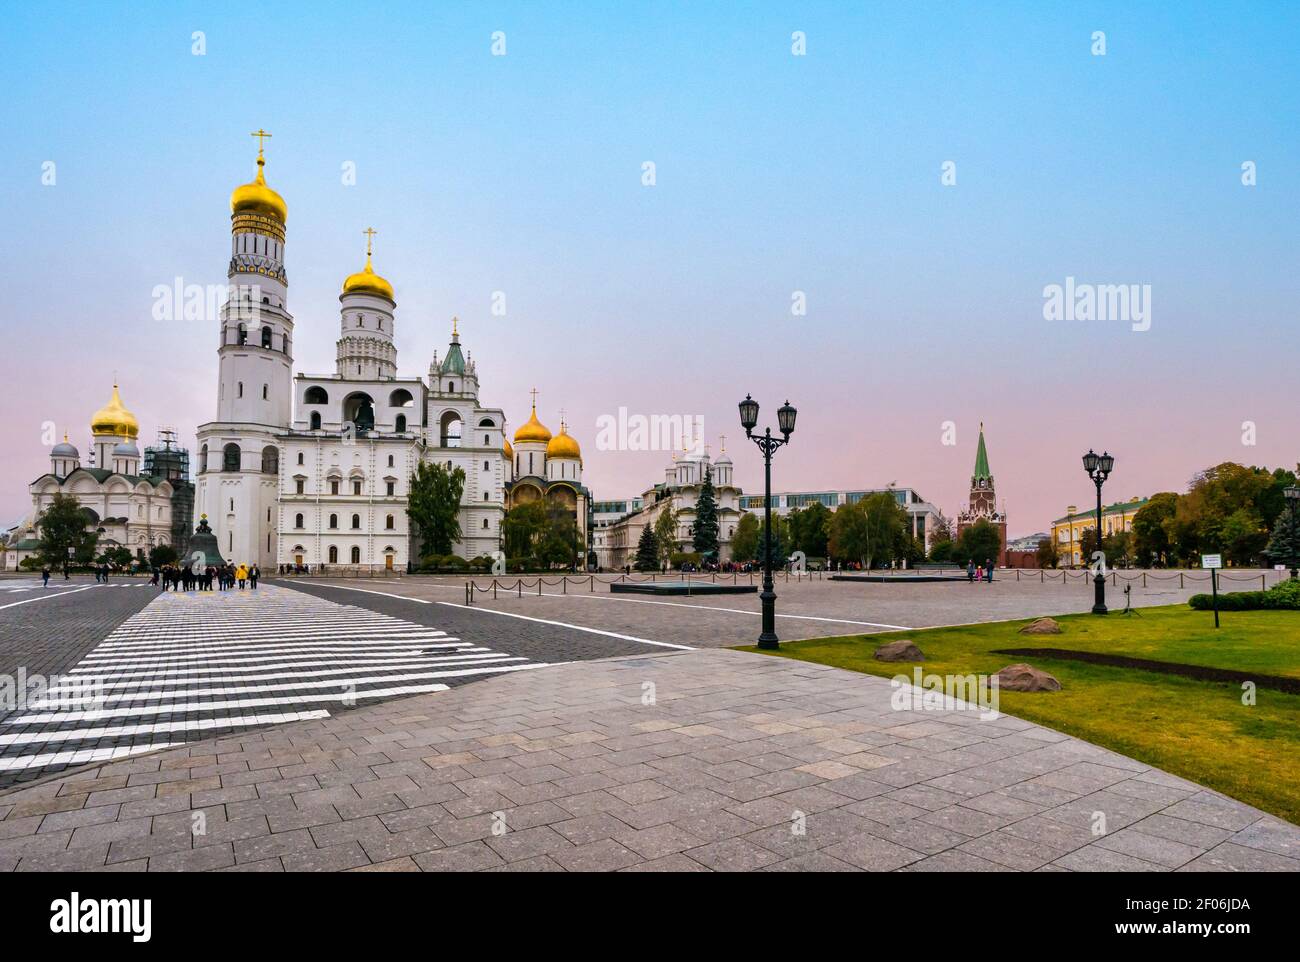 Ivanovskaya Square with gold domes of cathedrals and Ivan Great bell Tower with zebra crossing, Kremlin, Moscow, Russia Stock Photo